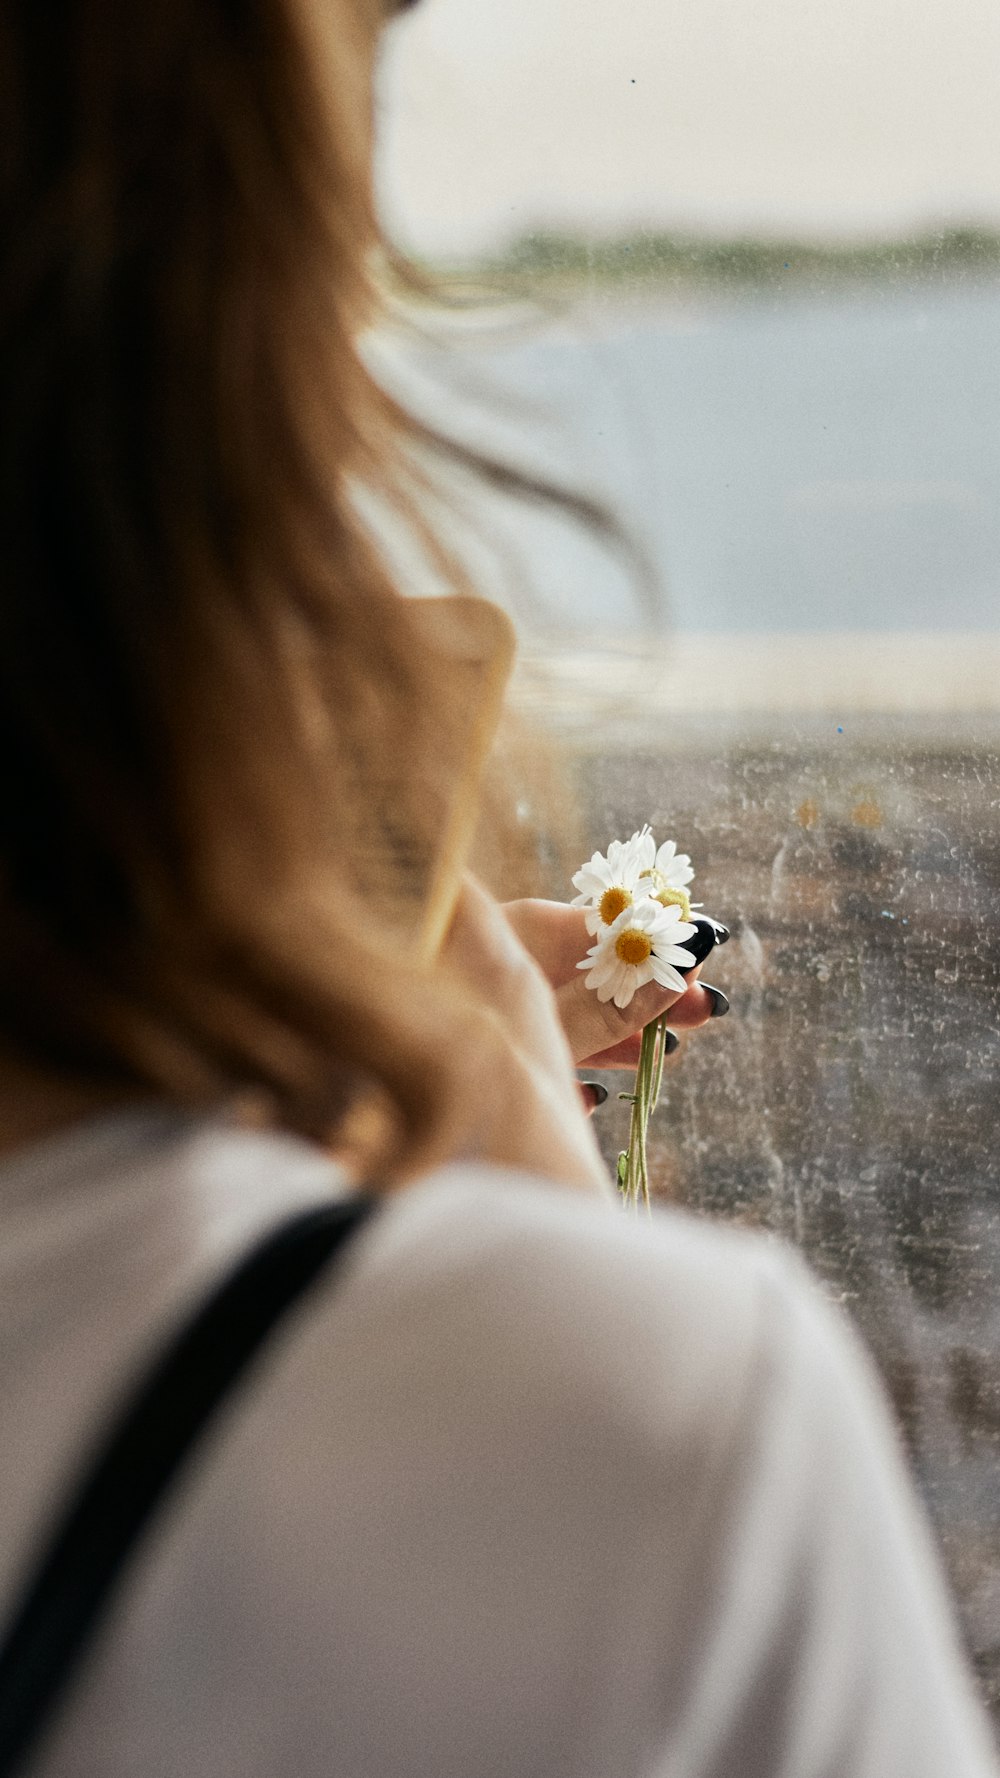 Girl Flowers Pictures | Download Free Images on Unsplash